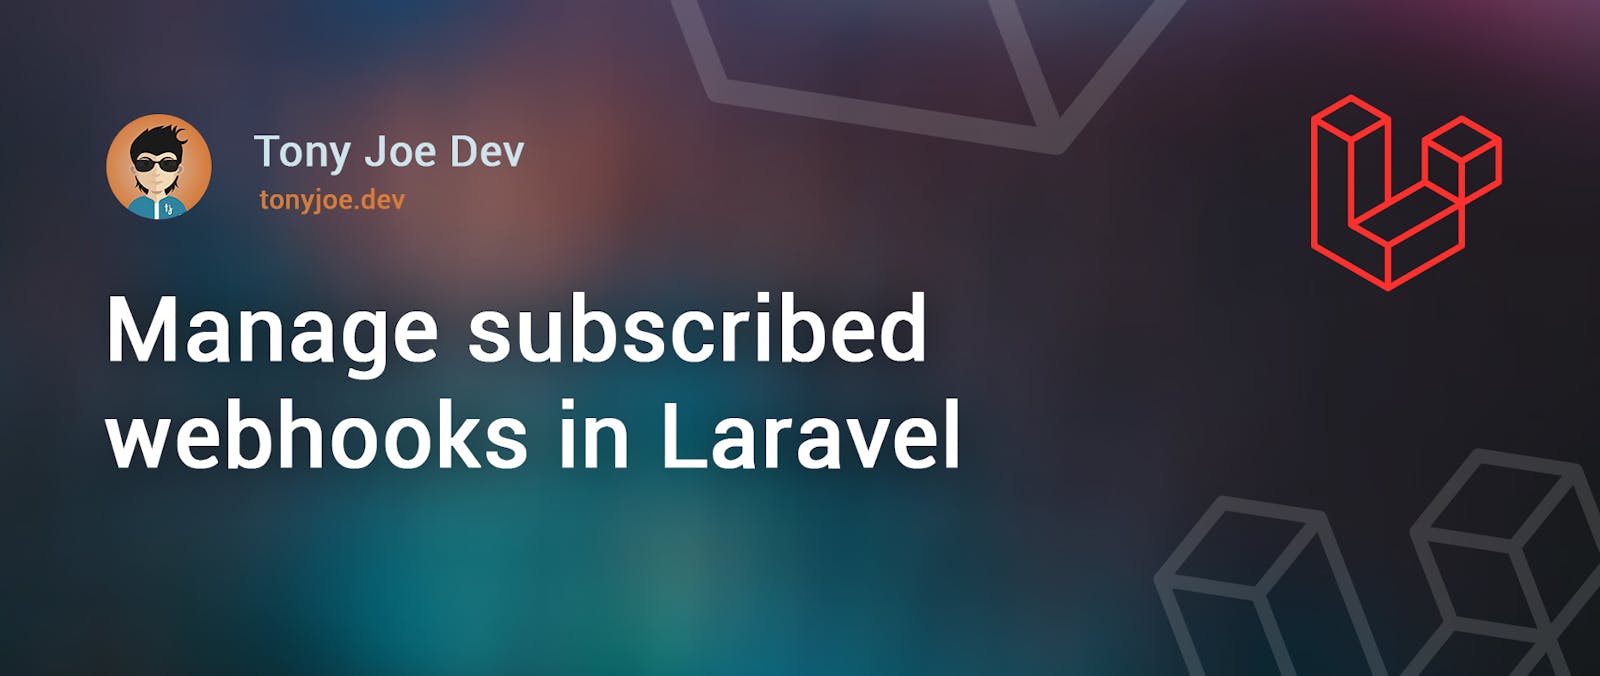 How to manage subscribed webhooks in Laravel